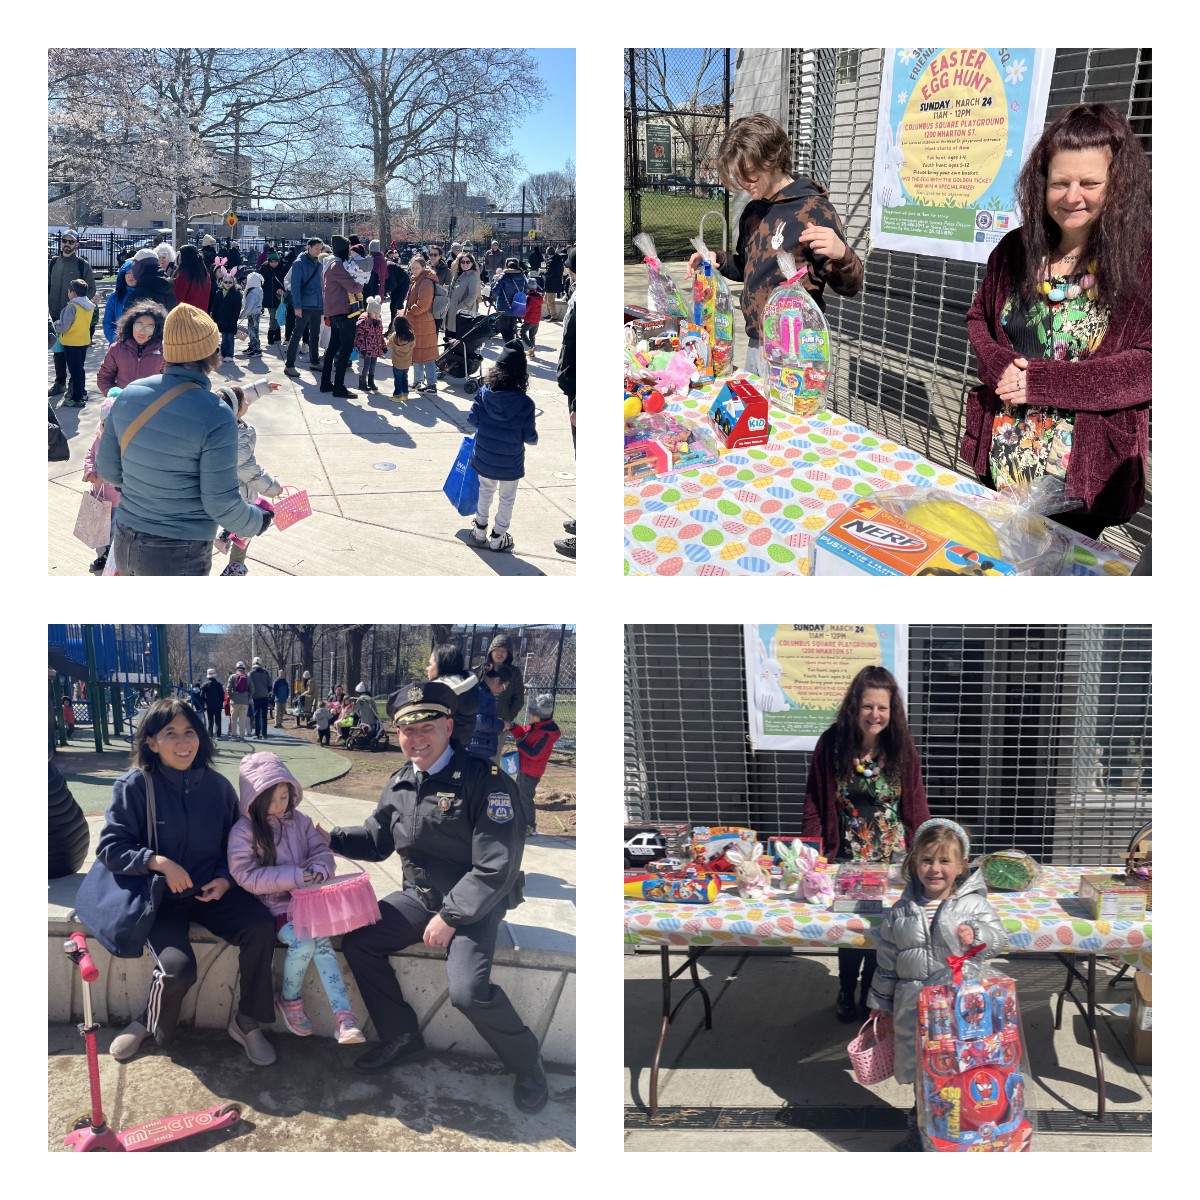 3rd Police District & Friends of Columbus Square Easter Egg Hunt! 🐰🥕🥚 The 3rd Police District would like to thank Friends of Columbus Square, @Target, Lou's Wholesale, @3rdPdac, and all of the Officers involved to help make our Easter Egg Hunt a successful day!